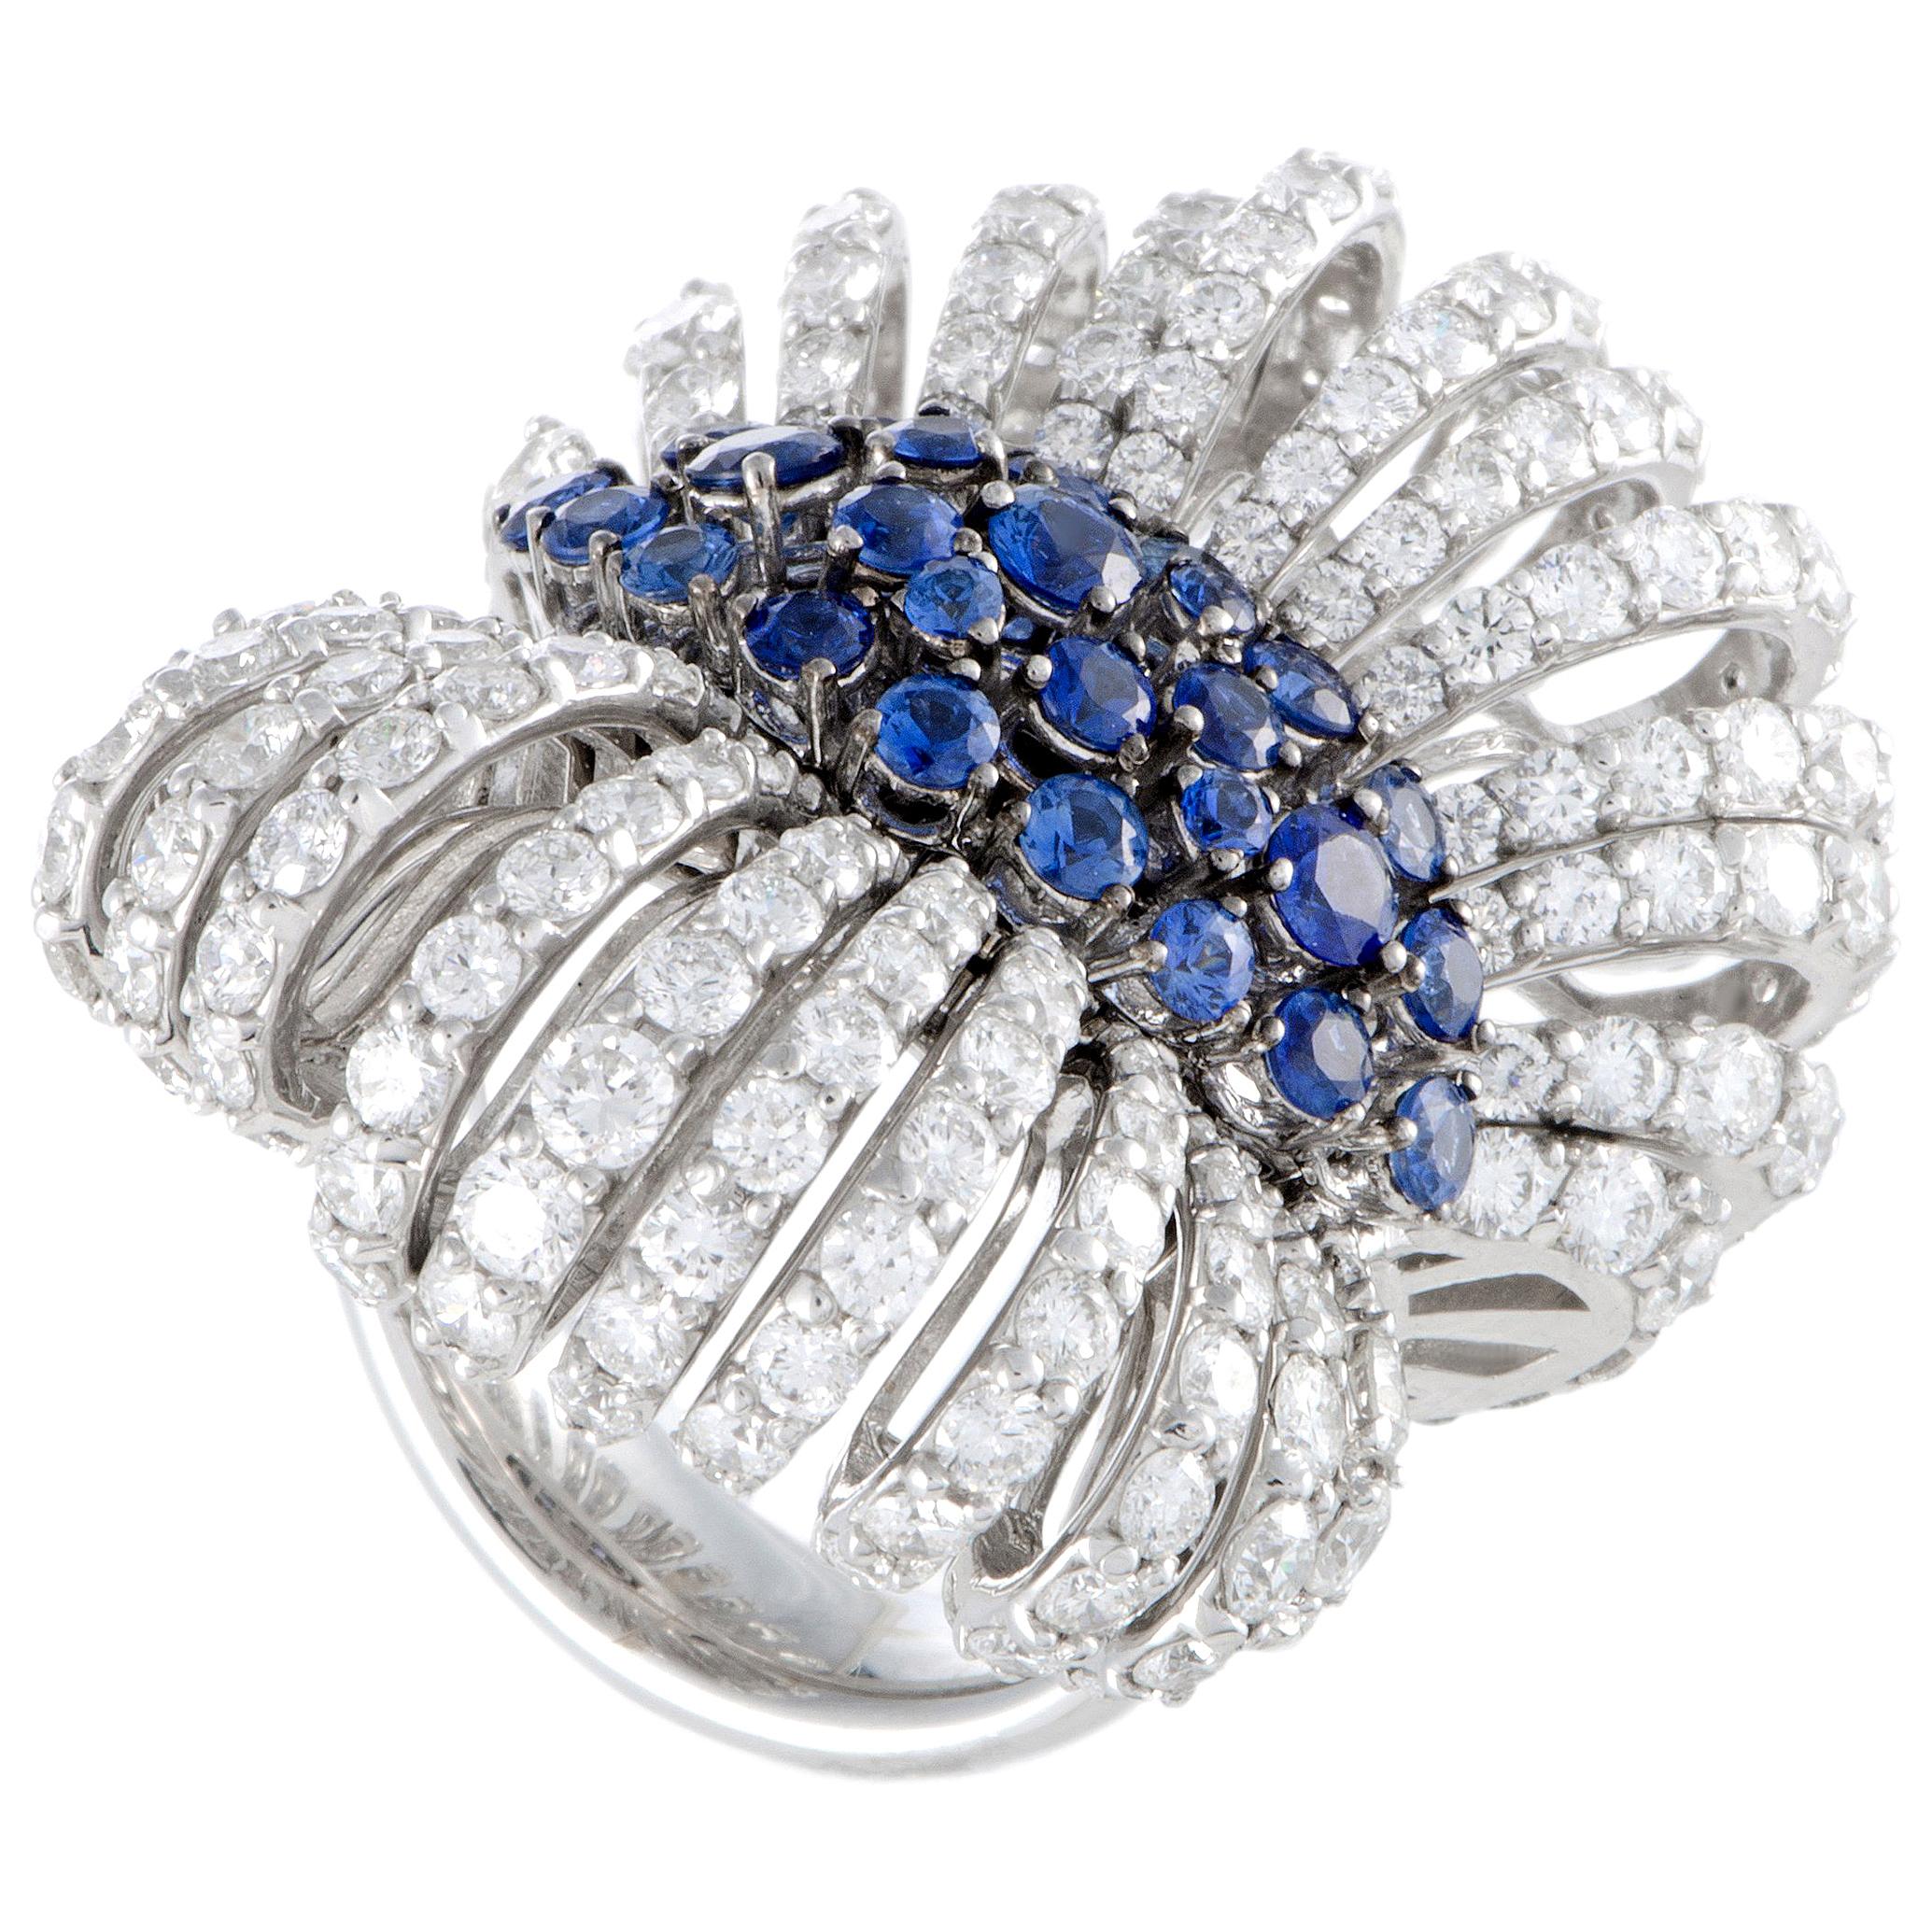 Stefan Hafner Diamond and Sapphire Pave White Gold Bow Ring